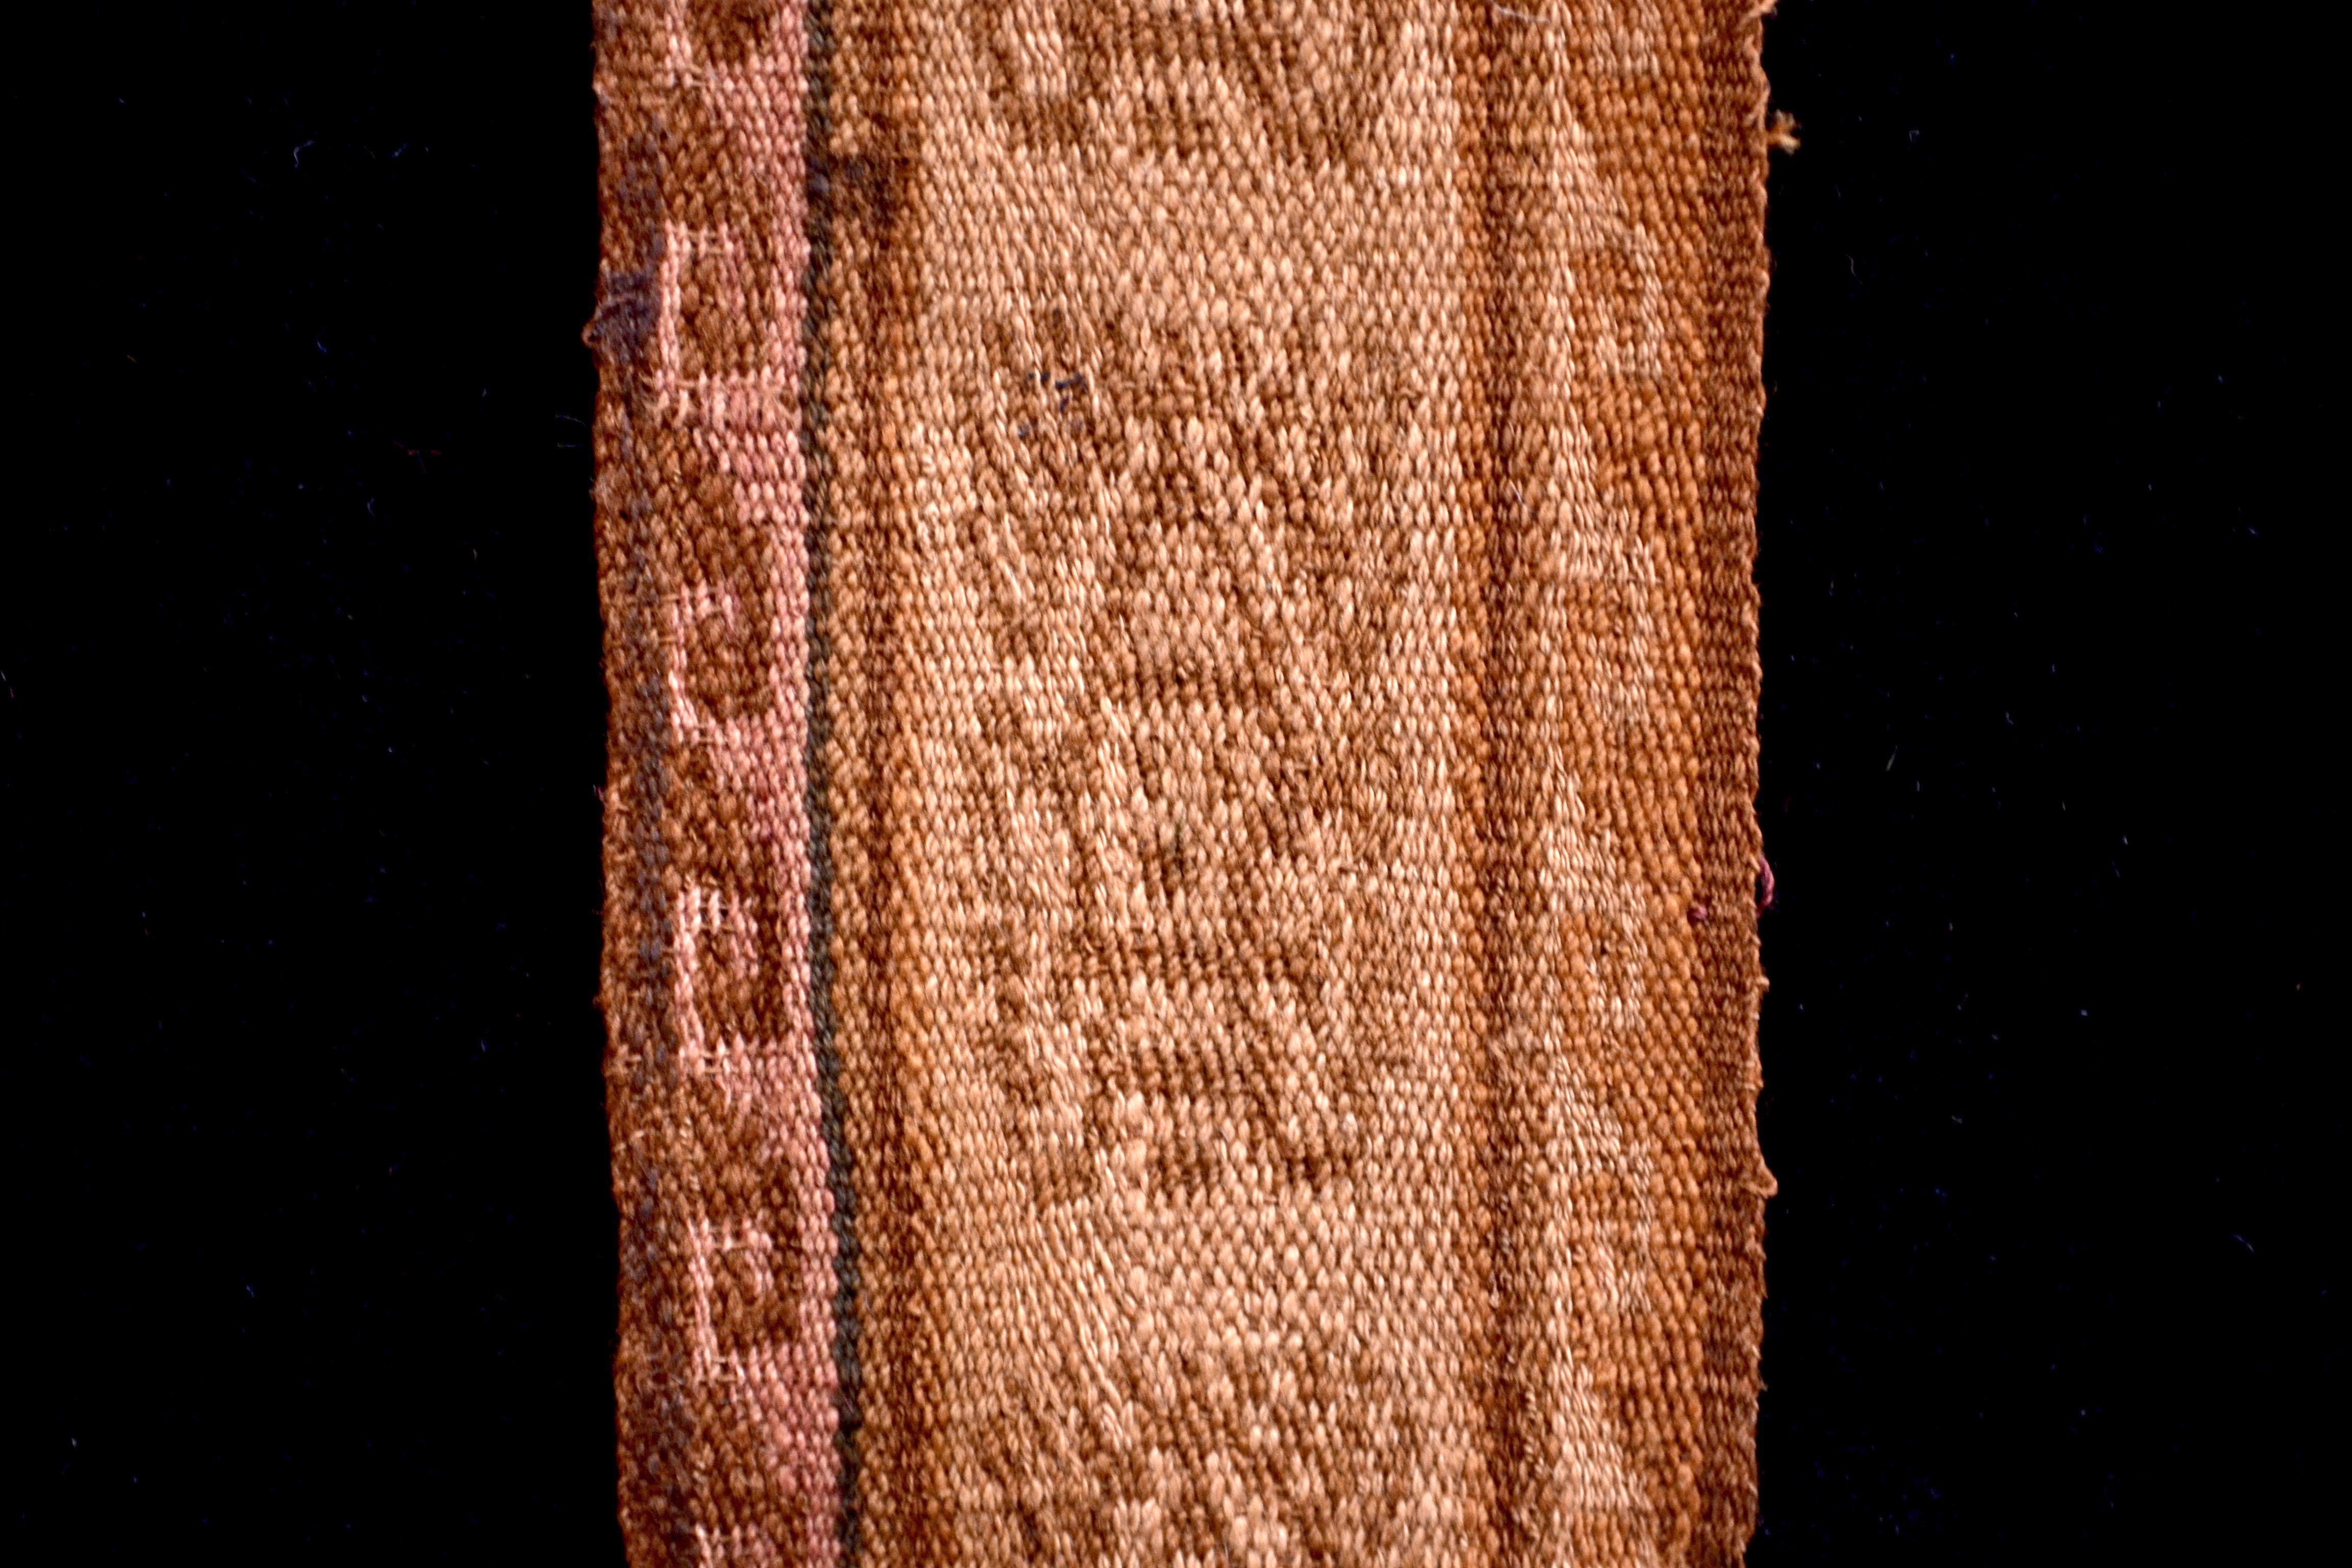 Earth tones pre-Columbian textile fragment with 5 embroidered anthropomorphic shaman figures. This piece is framed in a black shadowbox.

It is a wonder to behold antiquities such as a pre-Columbian textiles, an authentic piece of art that has been